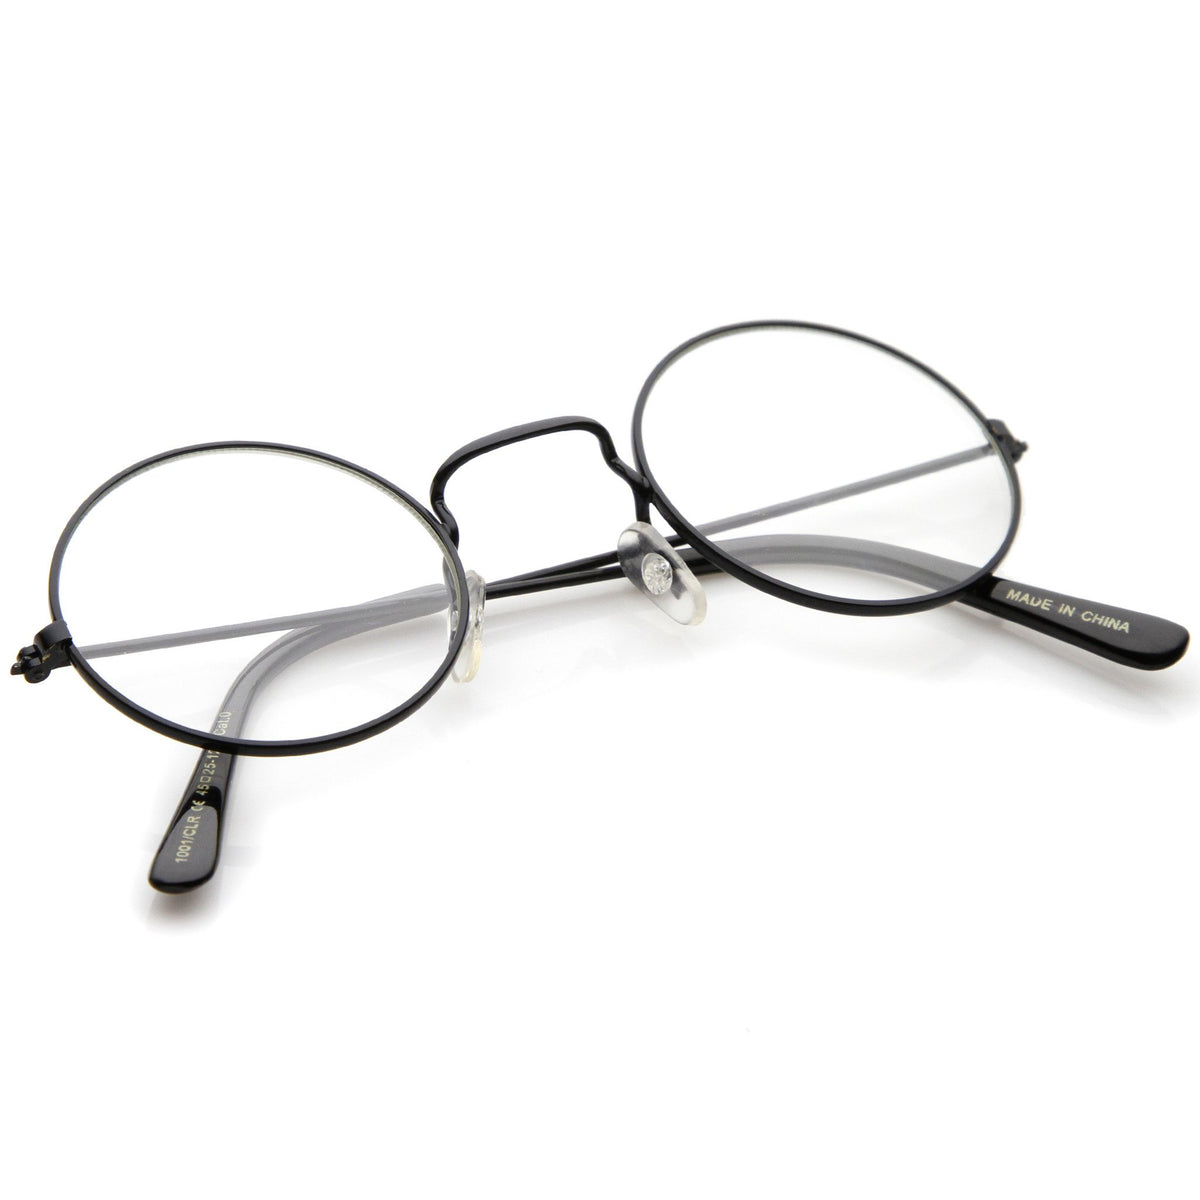 Vintage Inspired Round Metal Frame Clear Lens Glasses - zeroUV